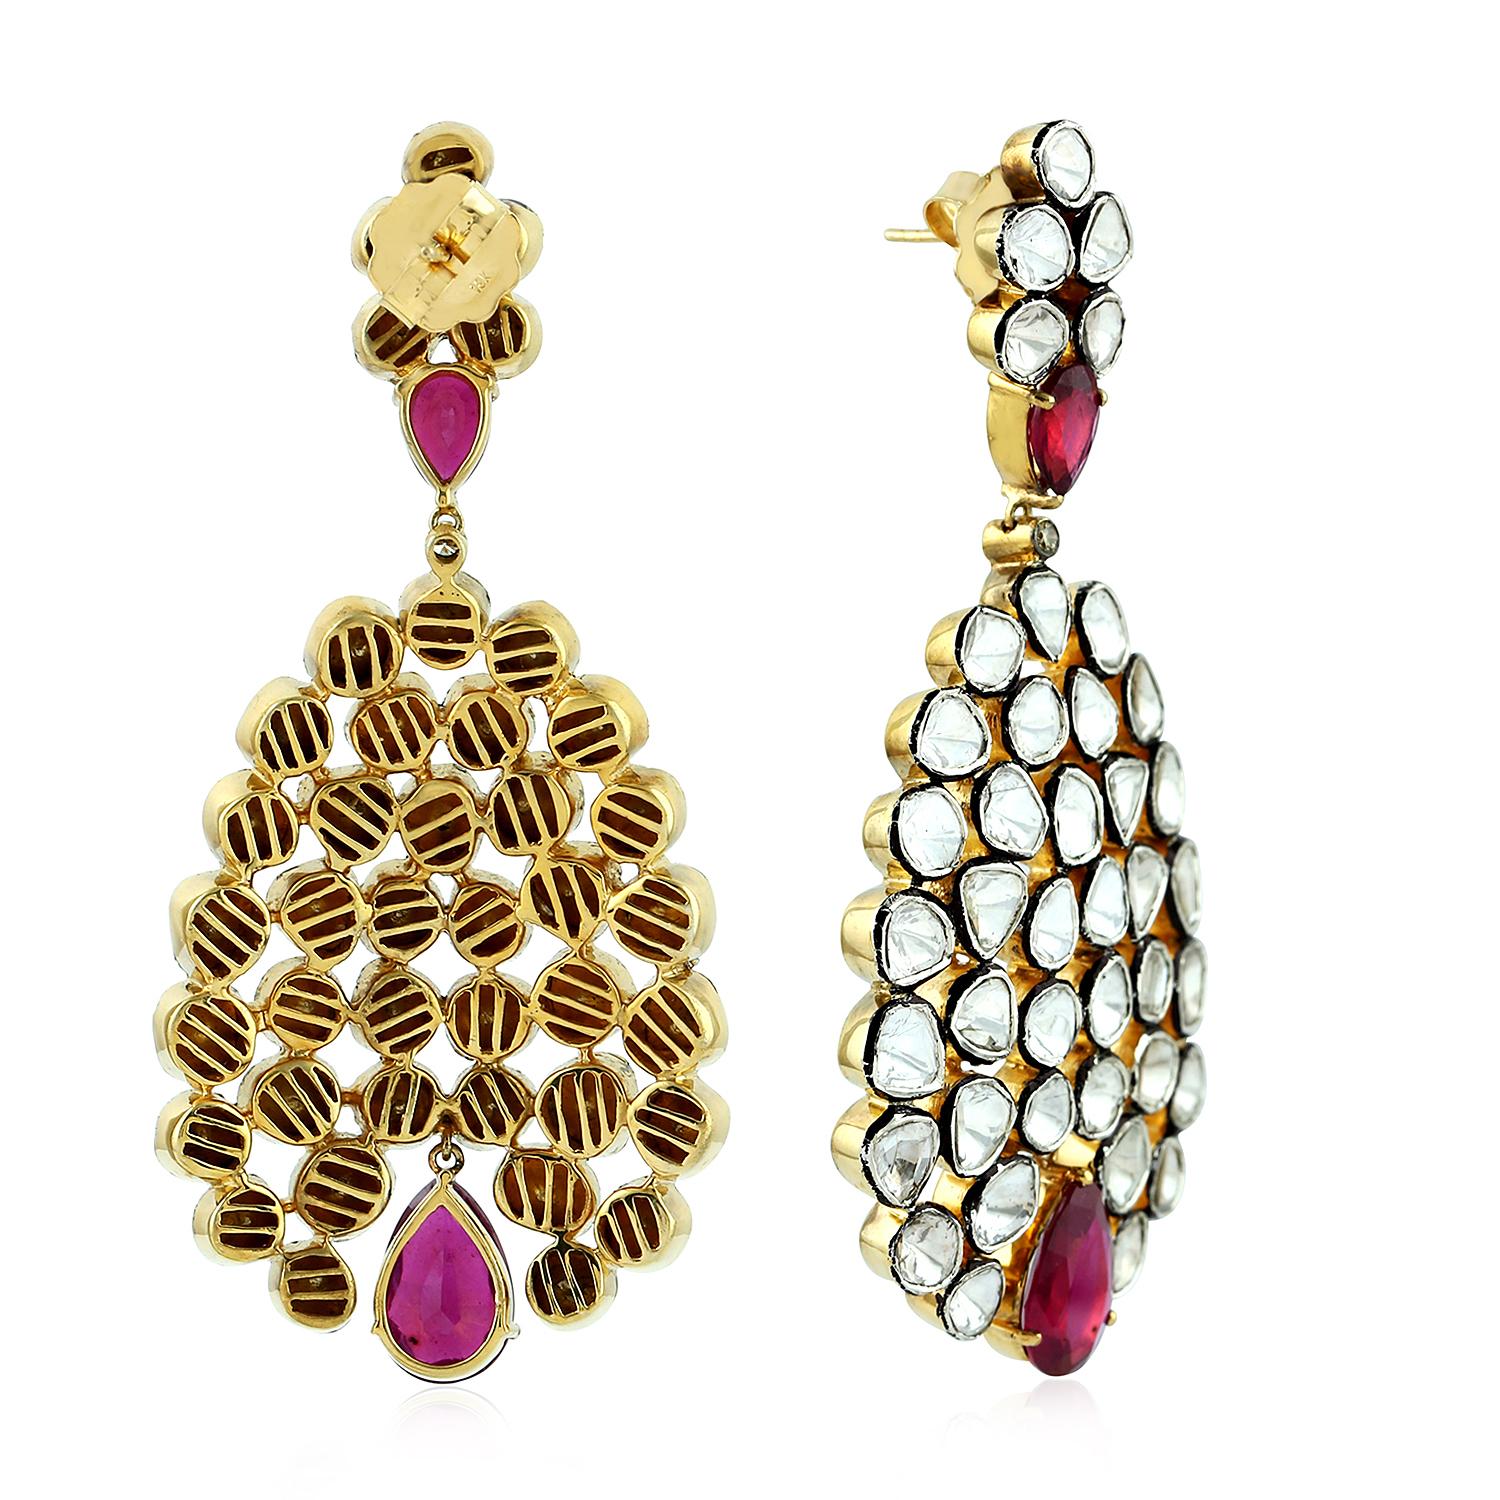 Mixed Cut 17.48ct Rosecut Diamonds Dangle Earrings With Ruby In 18k yellow Gold & Silver For Sale